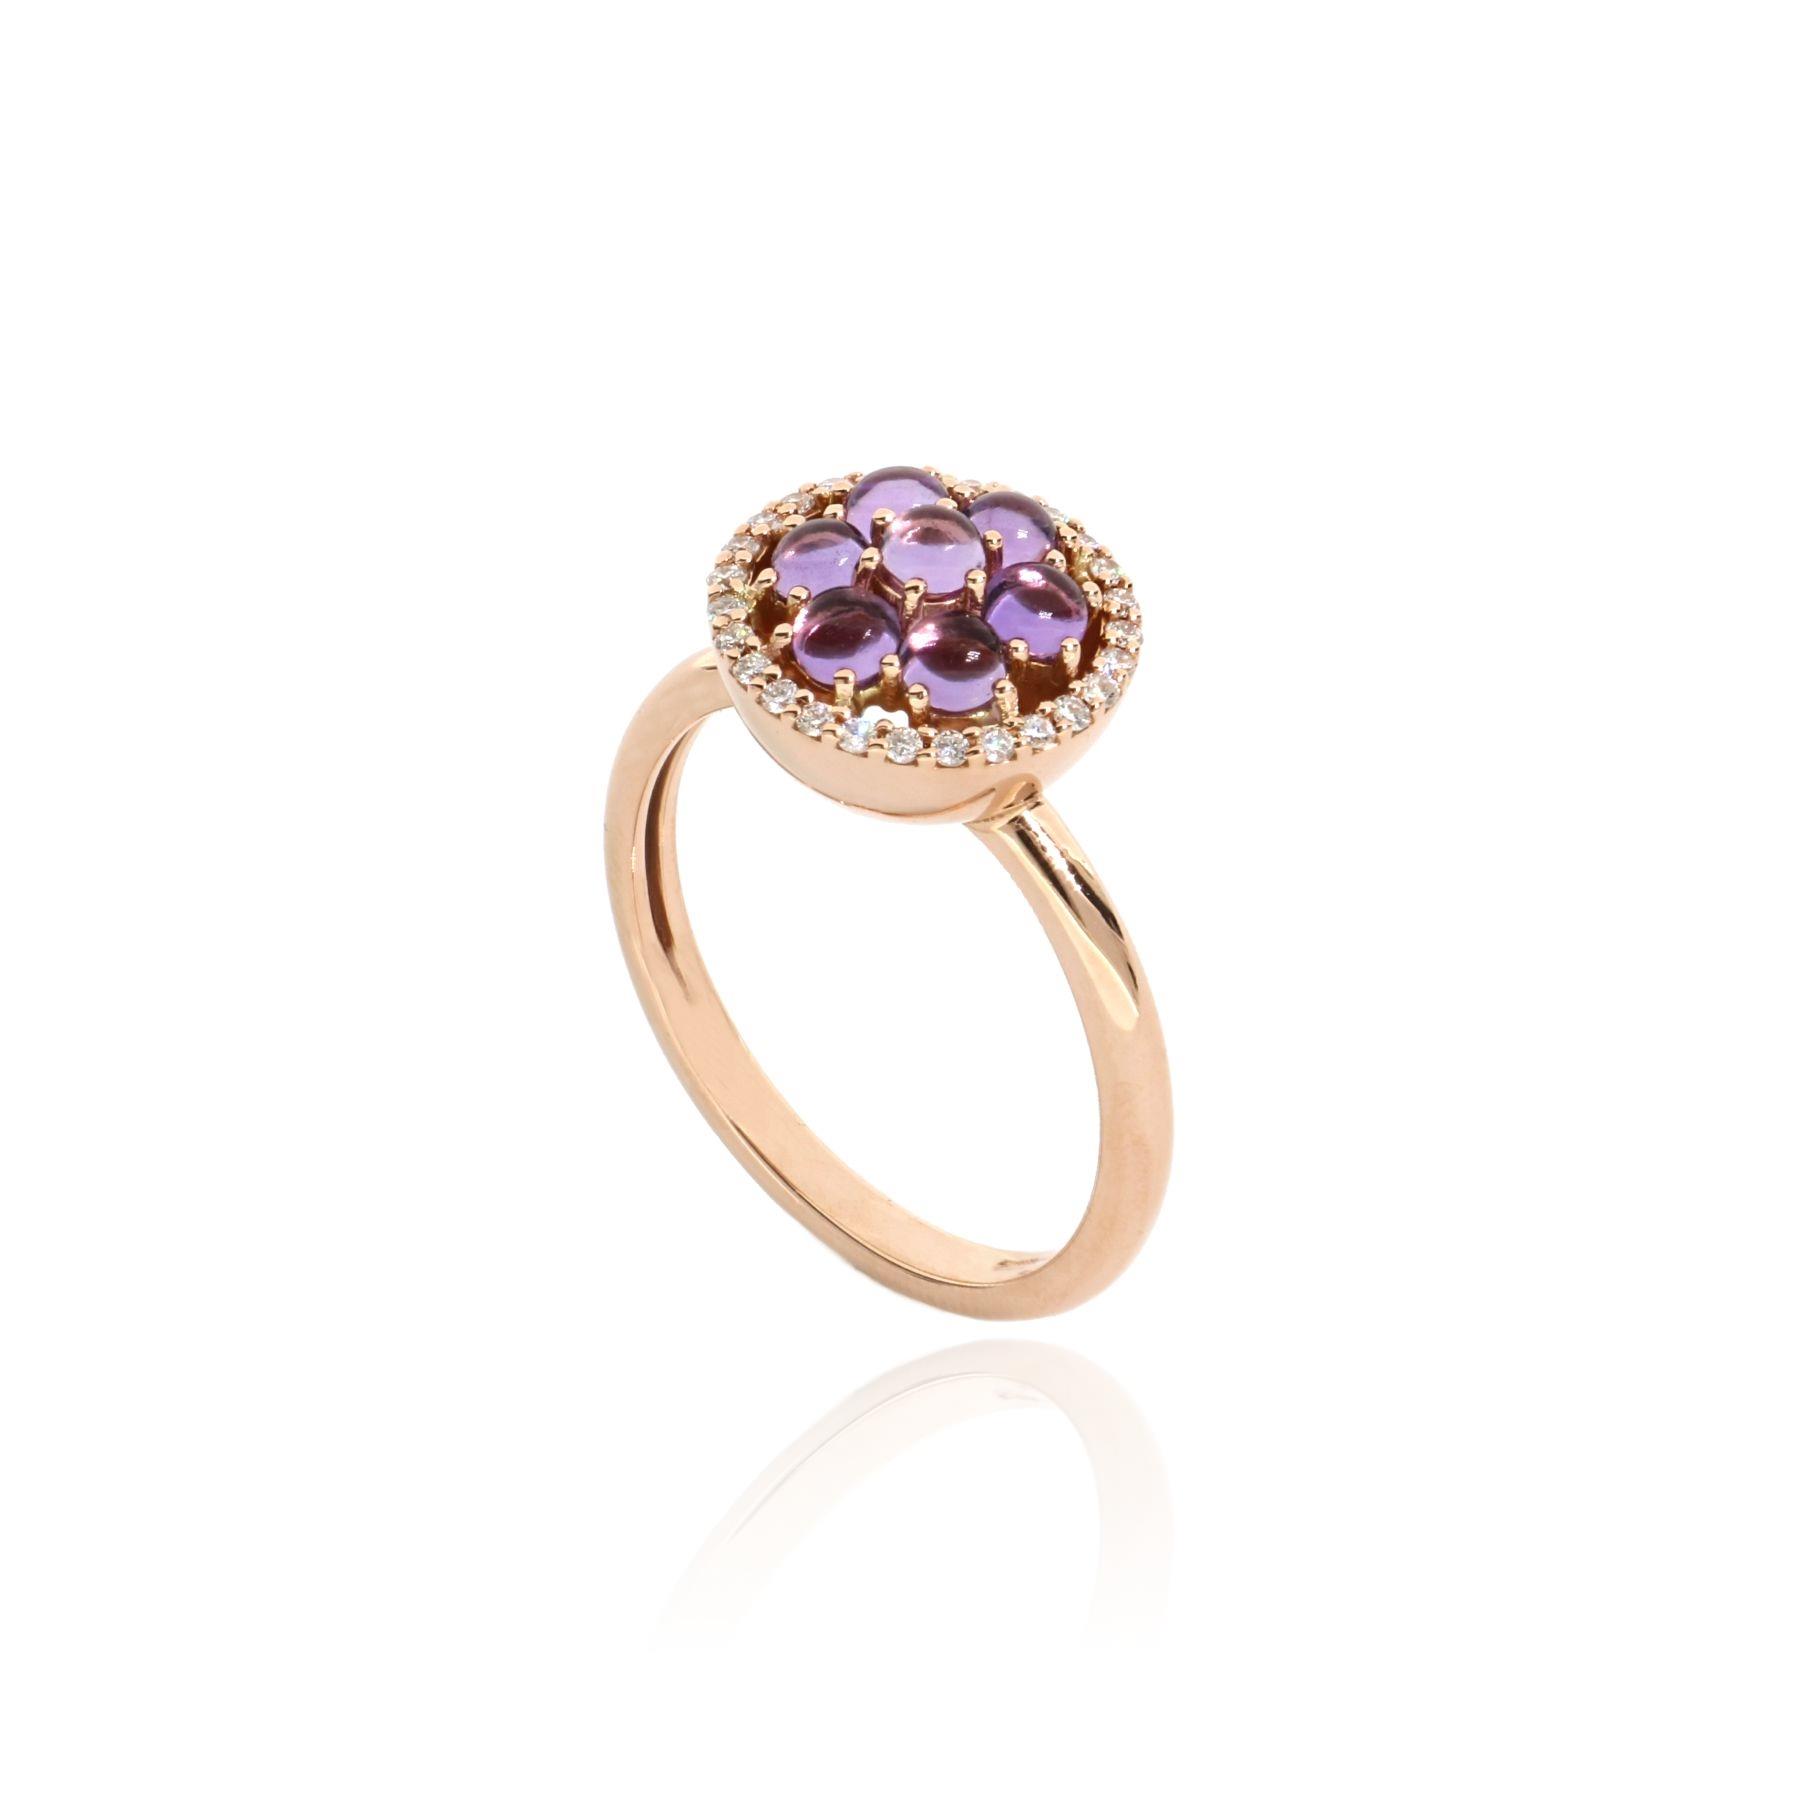 Rose gold ring with amethyst and diamonds - GOLD ART